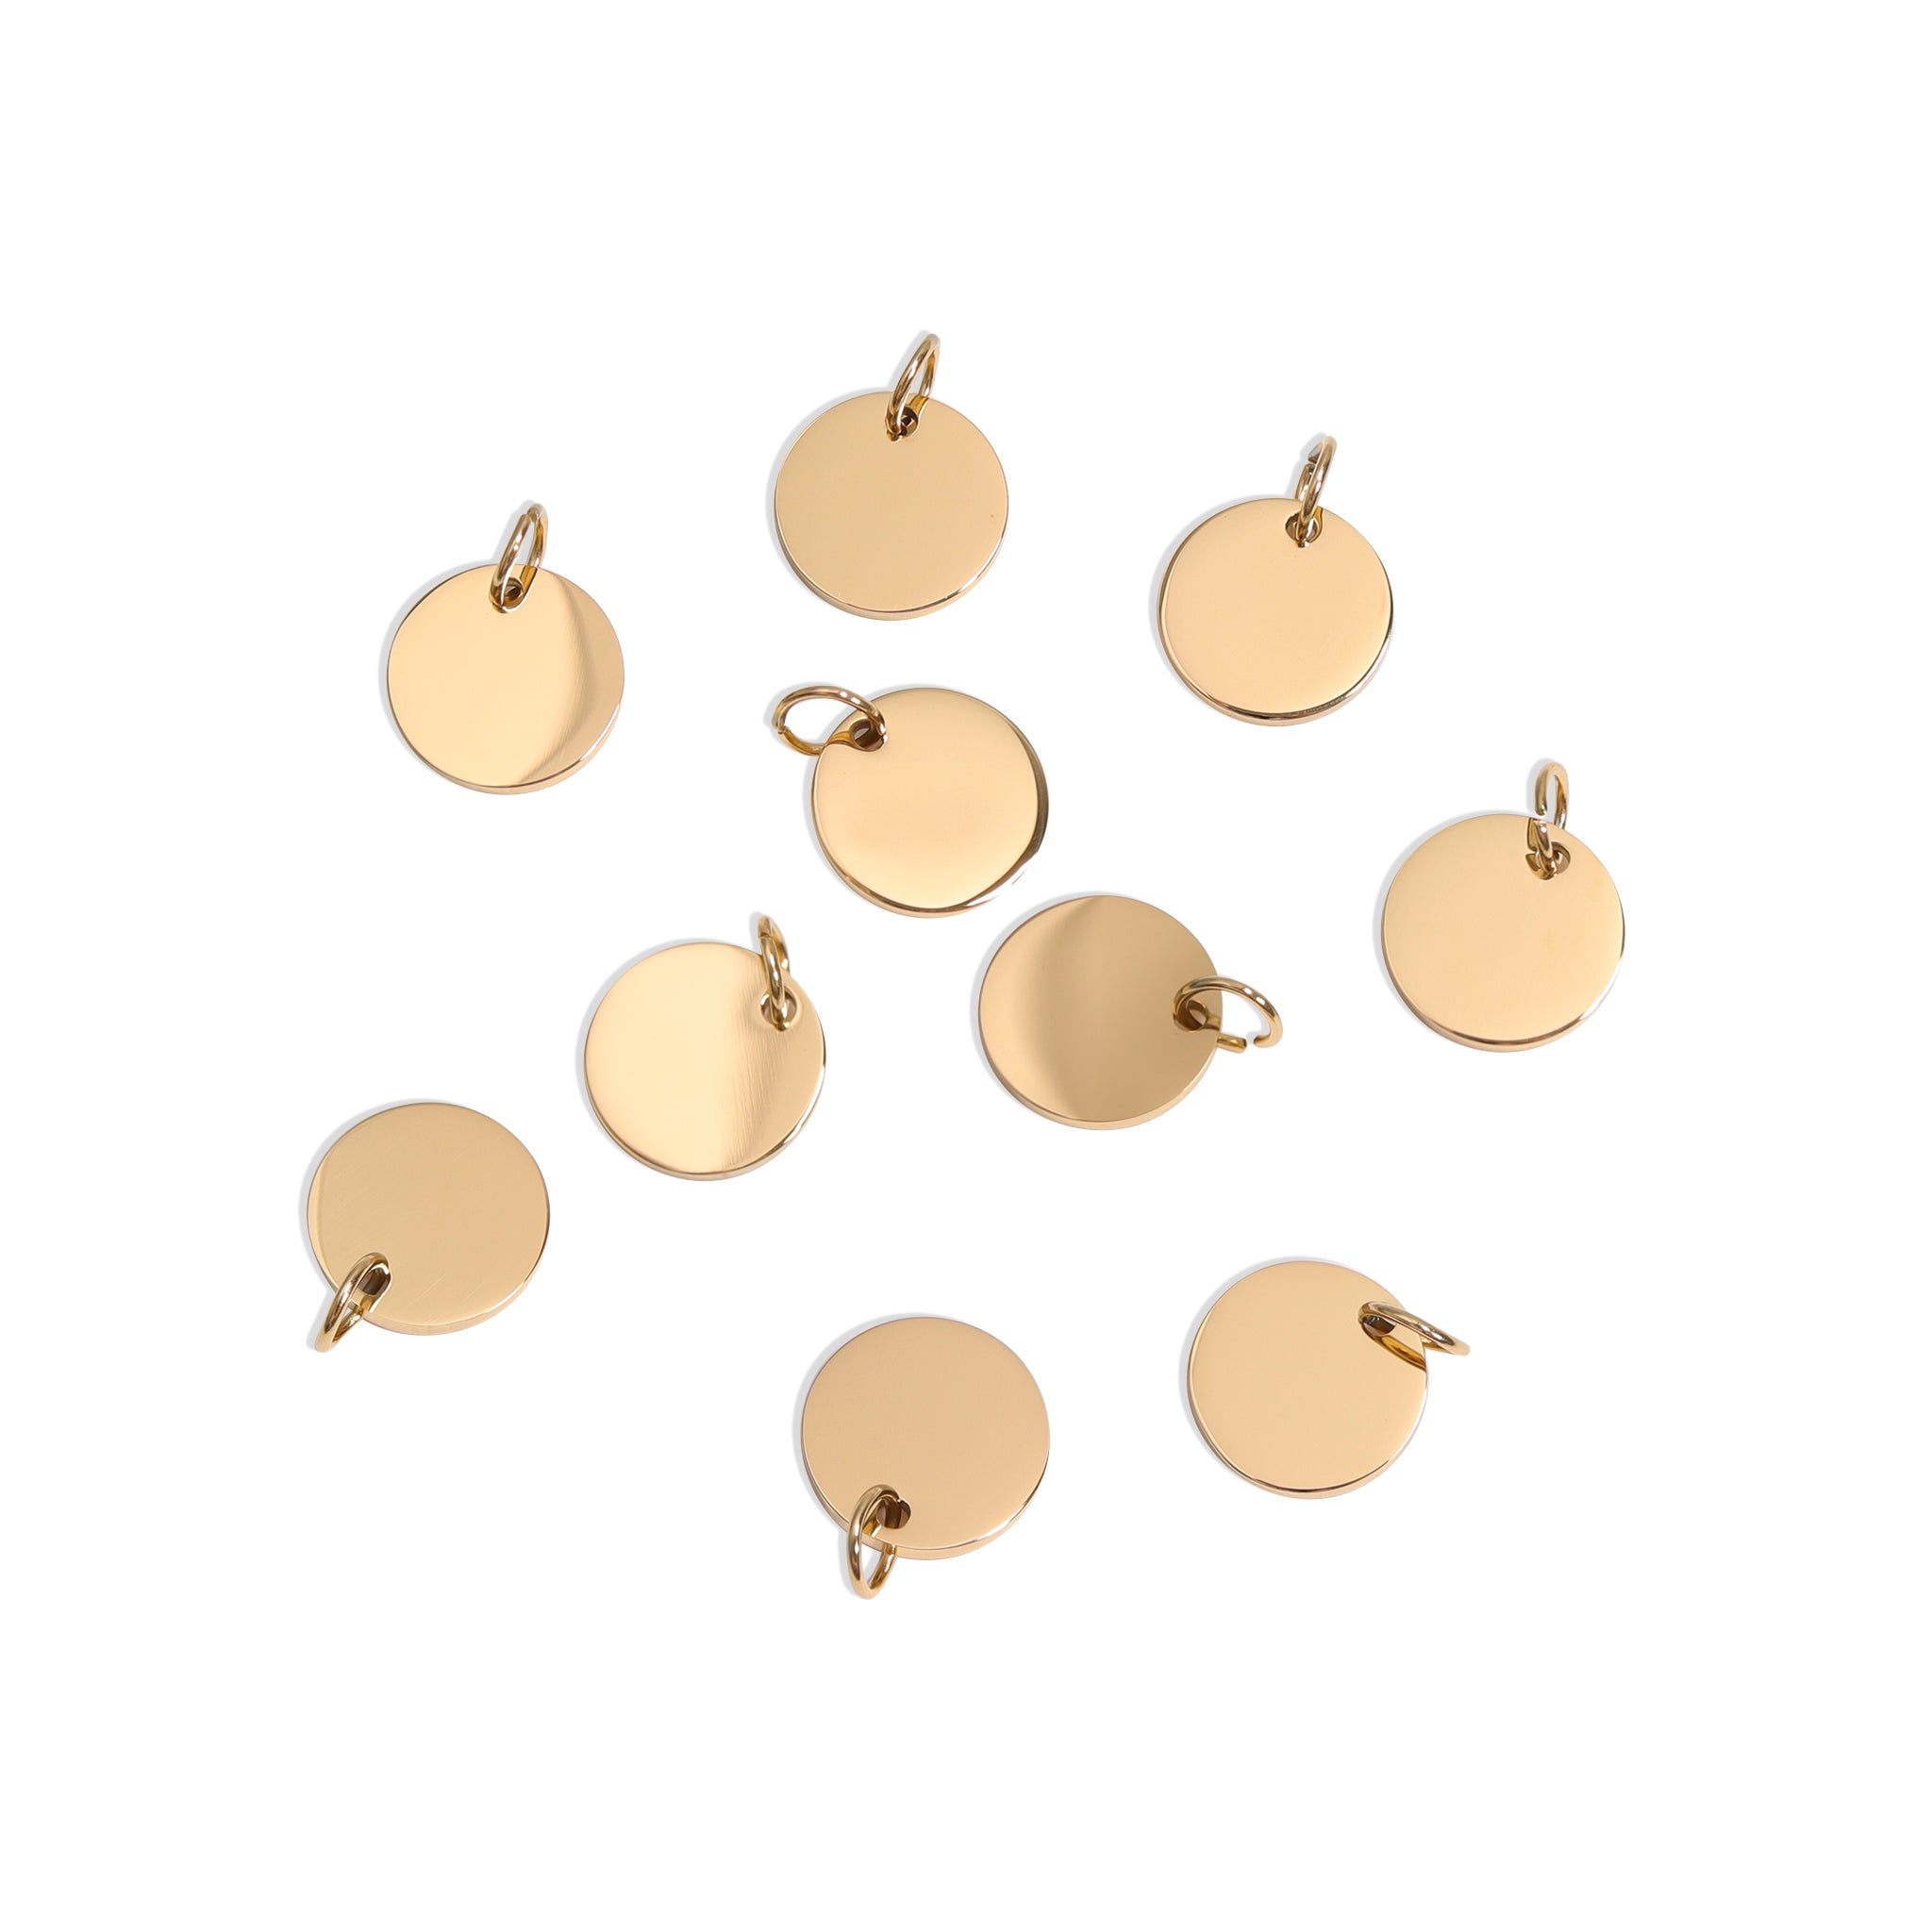 10 Pack - Gold Blank Stainless Steel Round Pendant 13mm / SBB0046